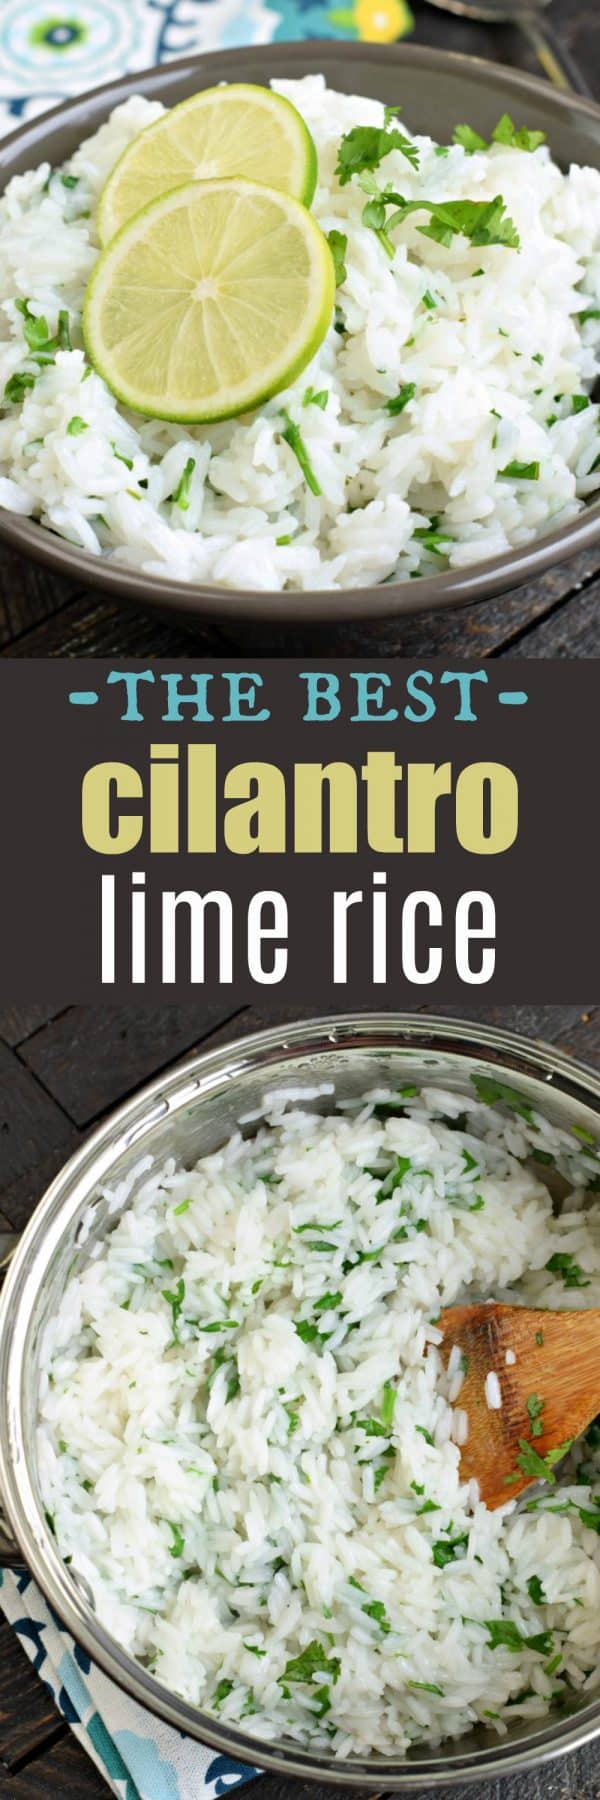 Colorful and packed with flavor, you'll love this Copycat Chipotle Cilantro Lime Rice recipe. It's the perfect side to any tex-mex meal!